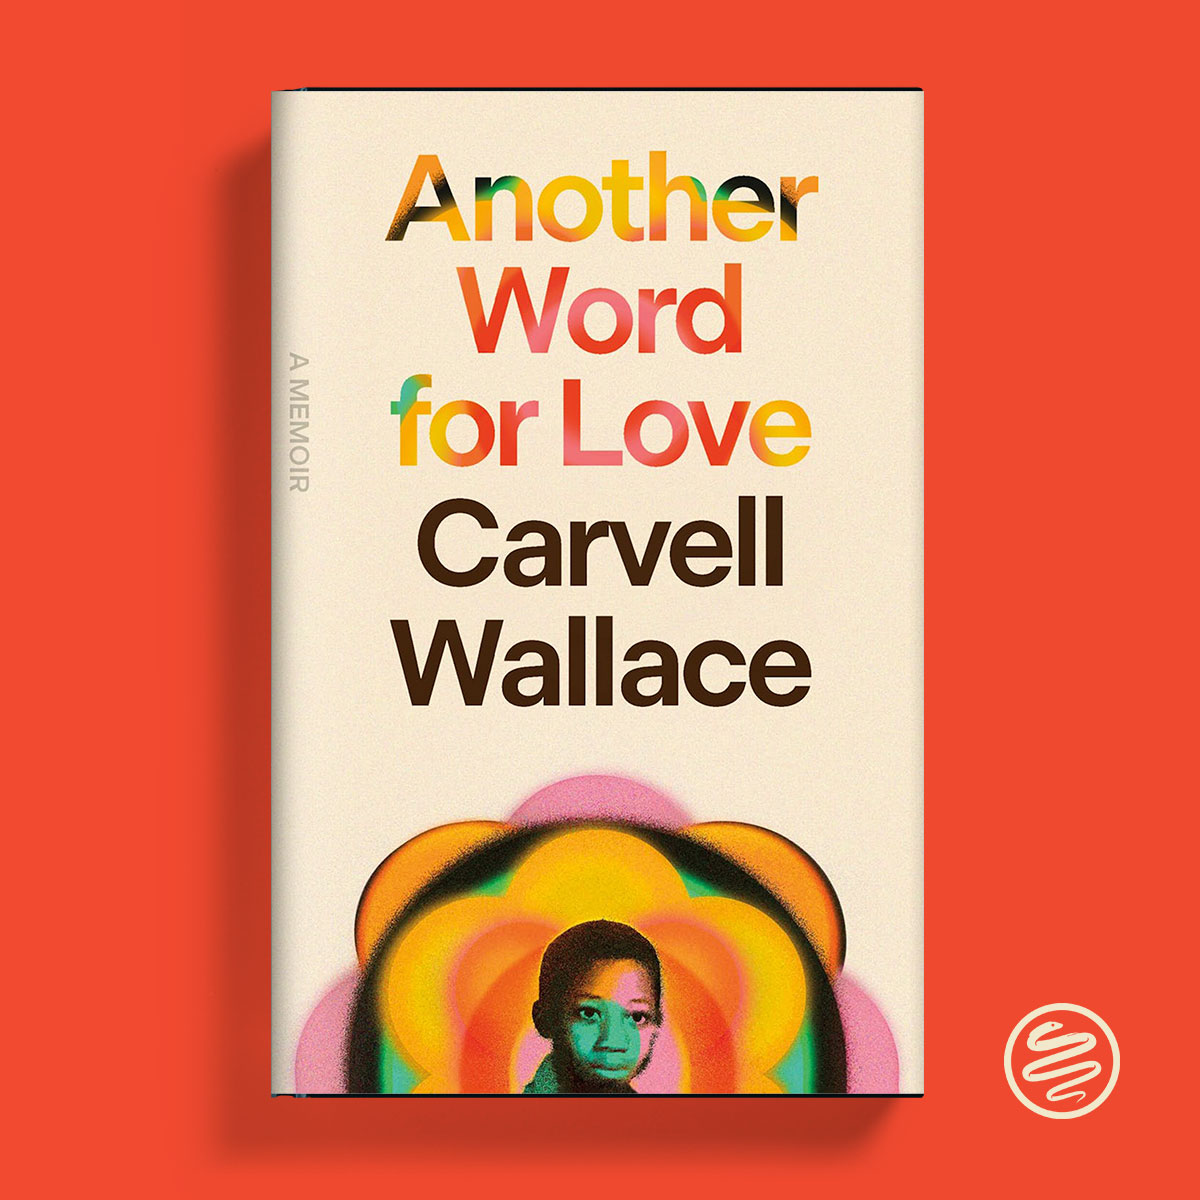 ANOTHER WORD FOR LOVE is a transformative memoir, excavating layers of @carvellwallace's history, situated in the struggles & beauty of growing up Black & queer in America, in order to reimagine the conventions of love & posit a radical vision for healing. bit.ly/3ylhfG1